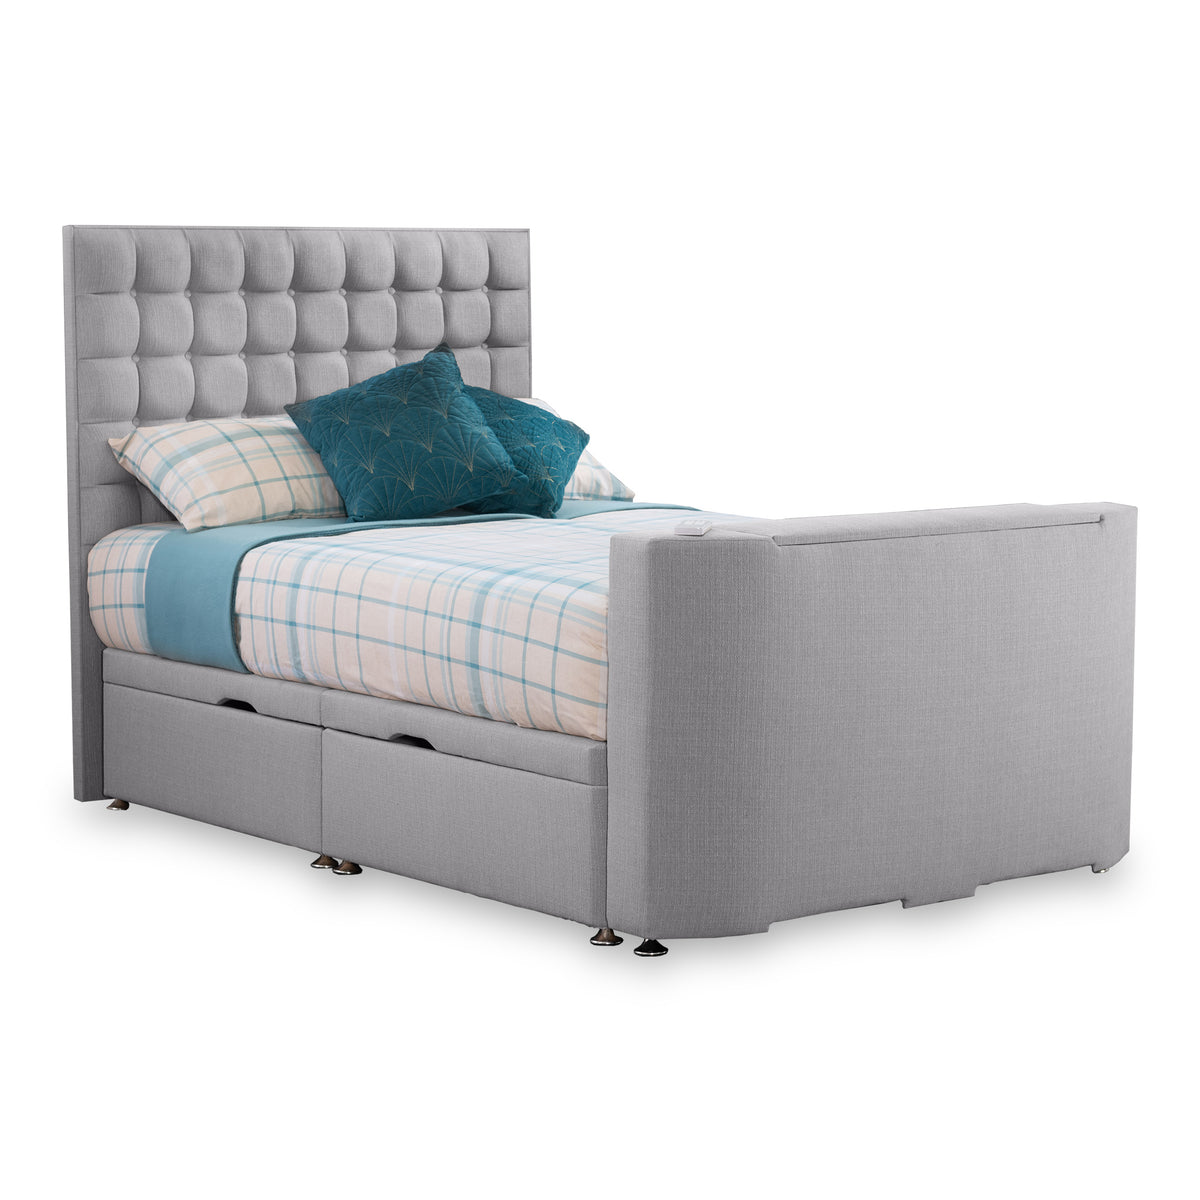 Bridgeford Ottoman Faux Linen TV Bed from Roseland Furniture